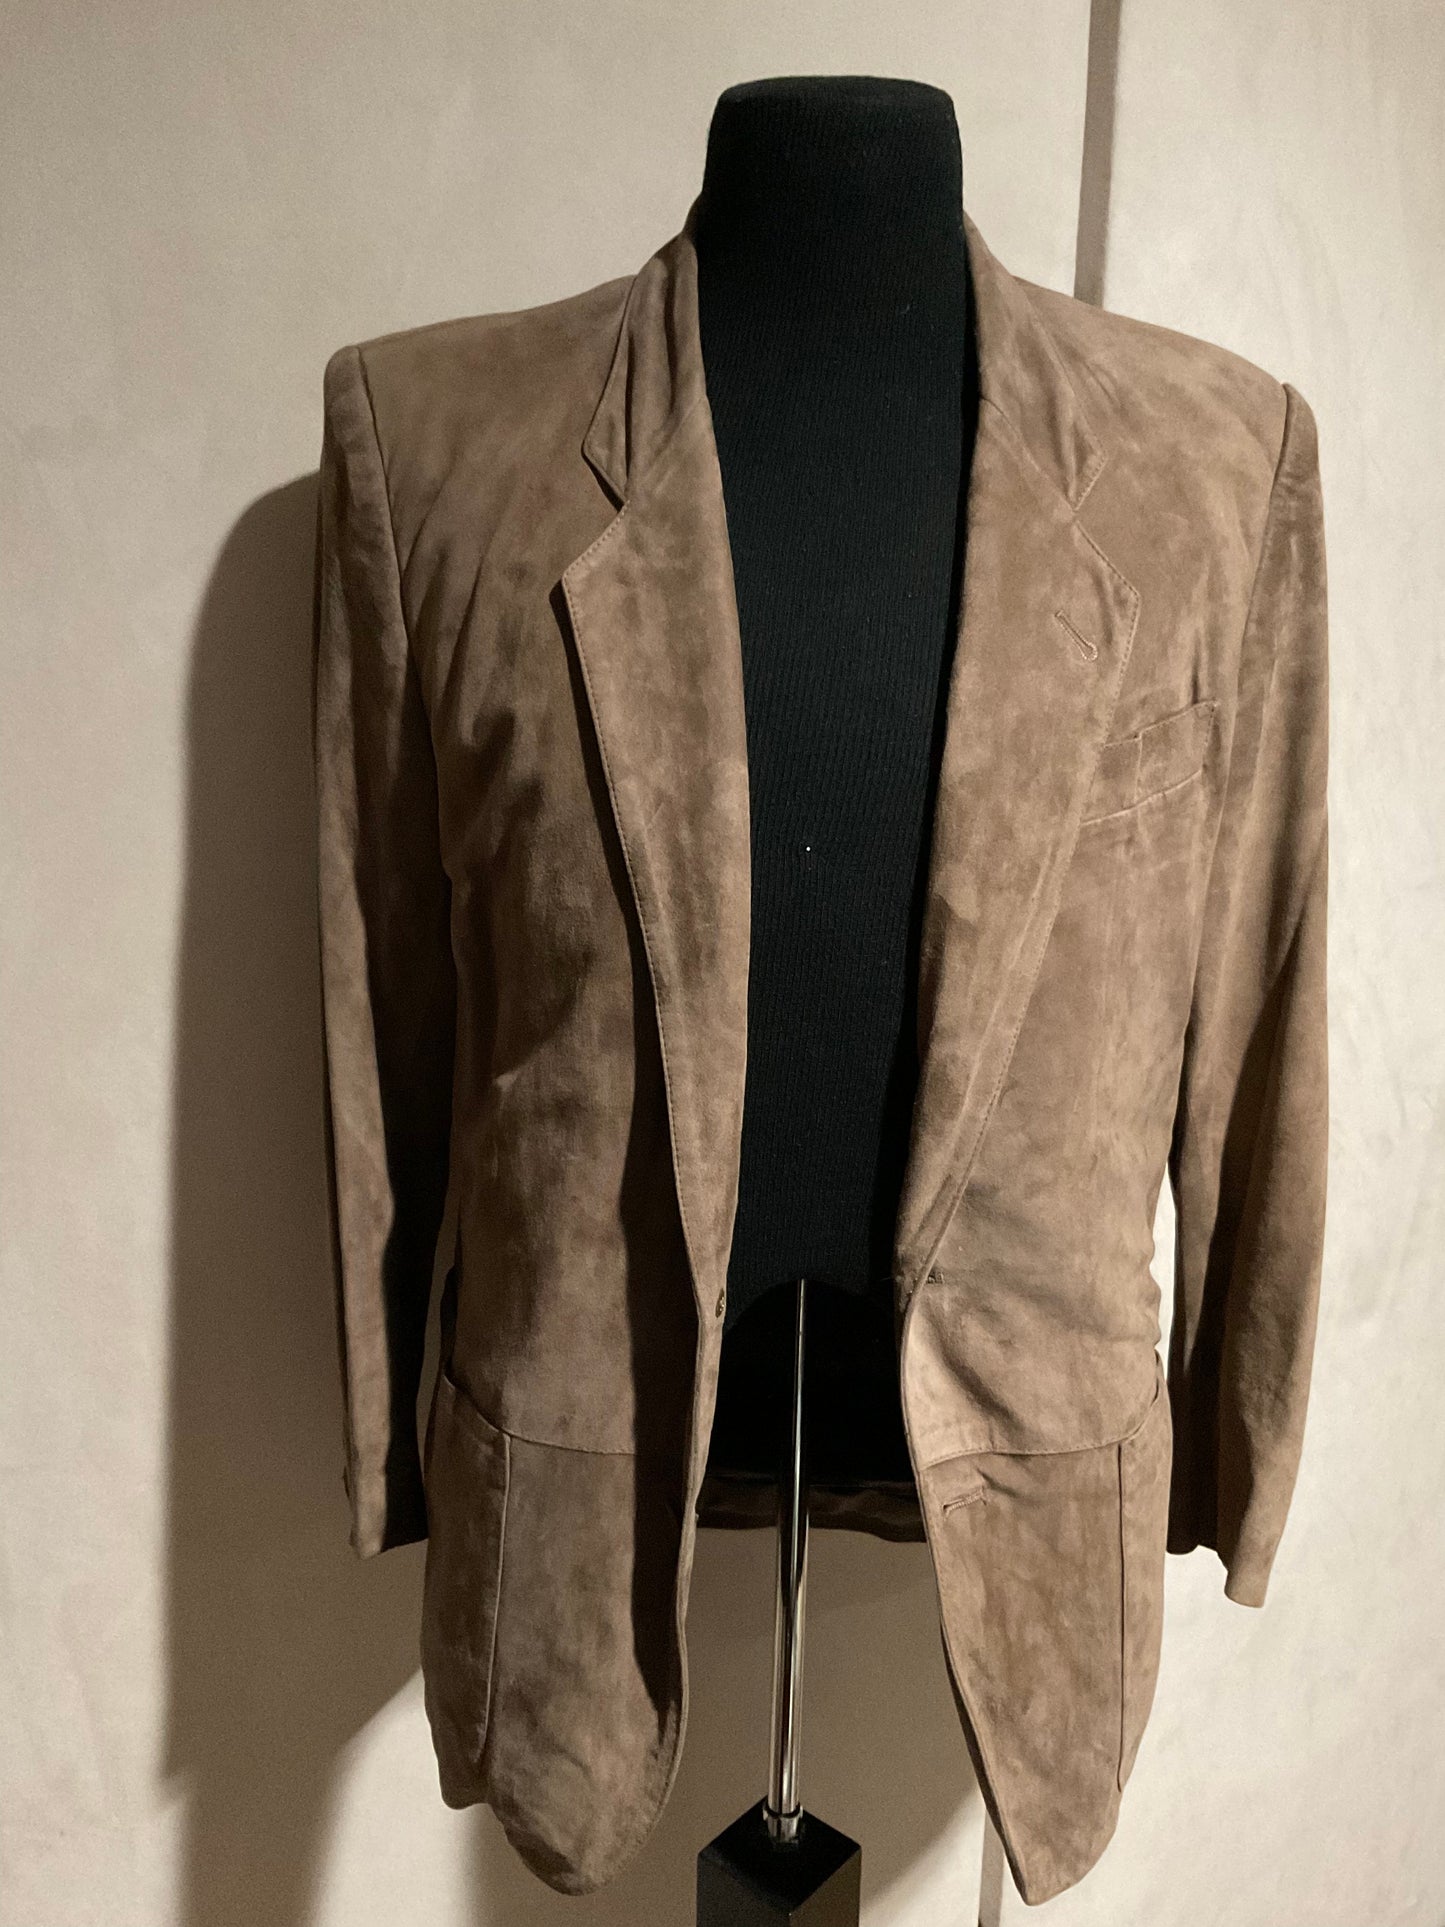 R P SUEDE BLAZER JACKET / TAUPE / MEDIUM / MADE IN ITALY